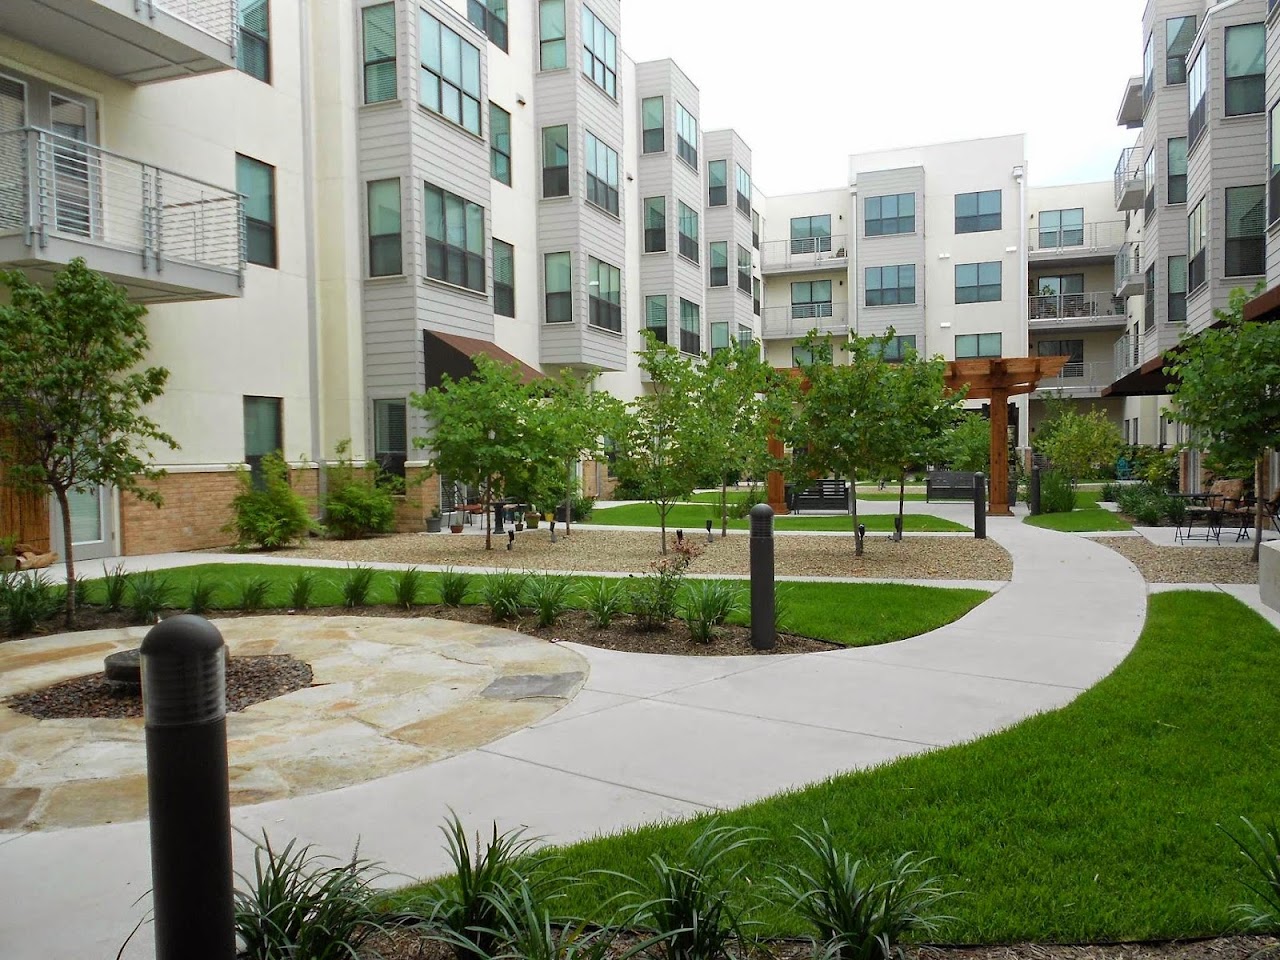 Photo of WILDFLOWER TERRACE. Affordable housing located at 3801 BERKMAN DR AUSTIN, TX 78723